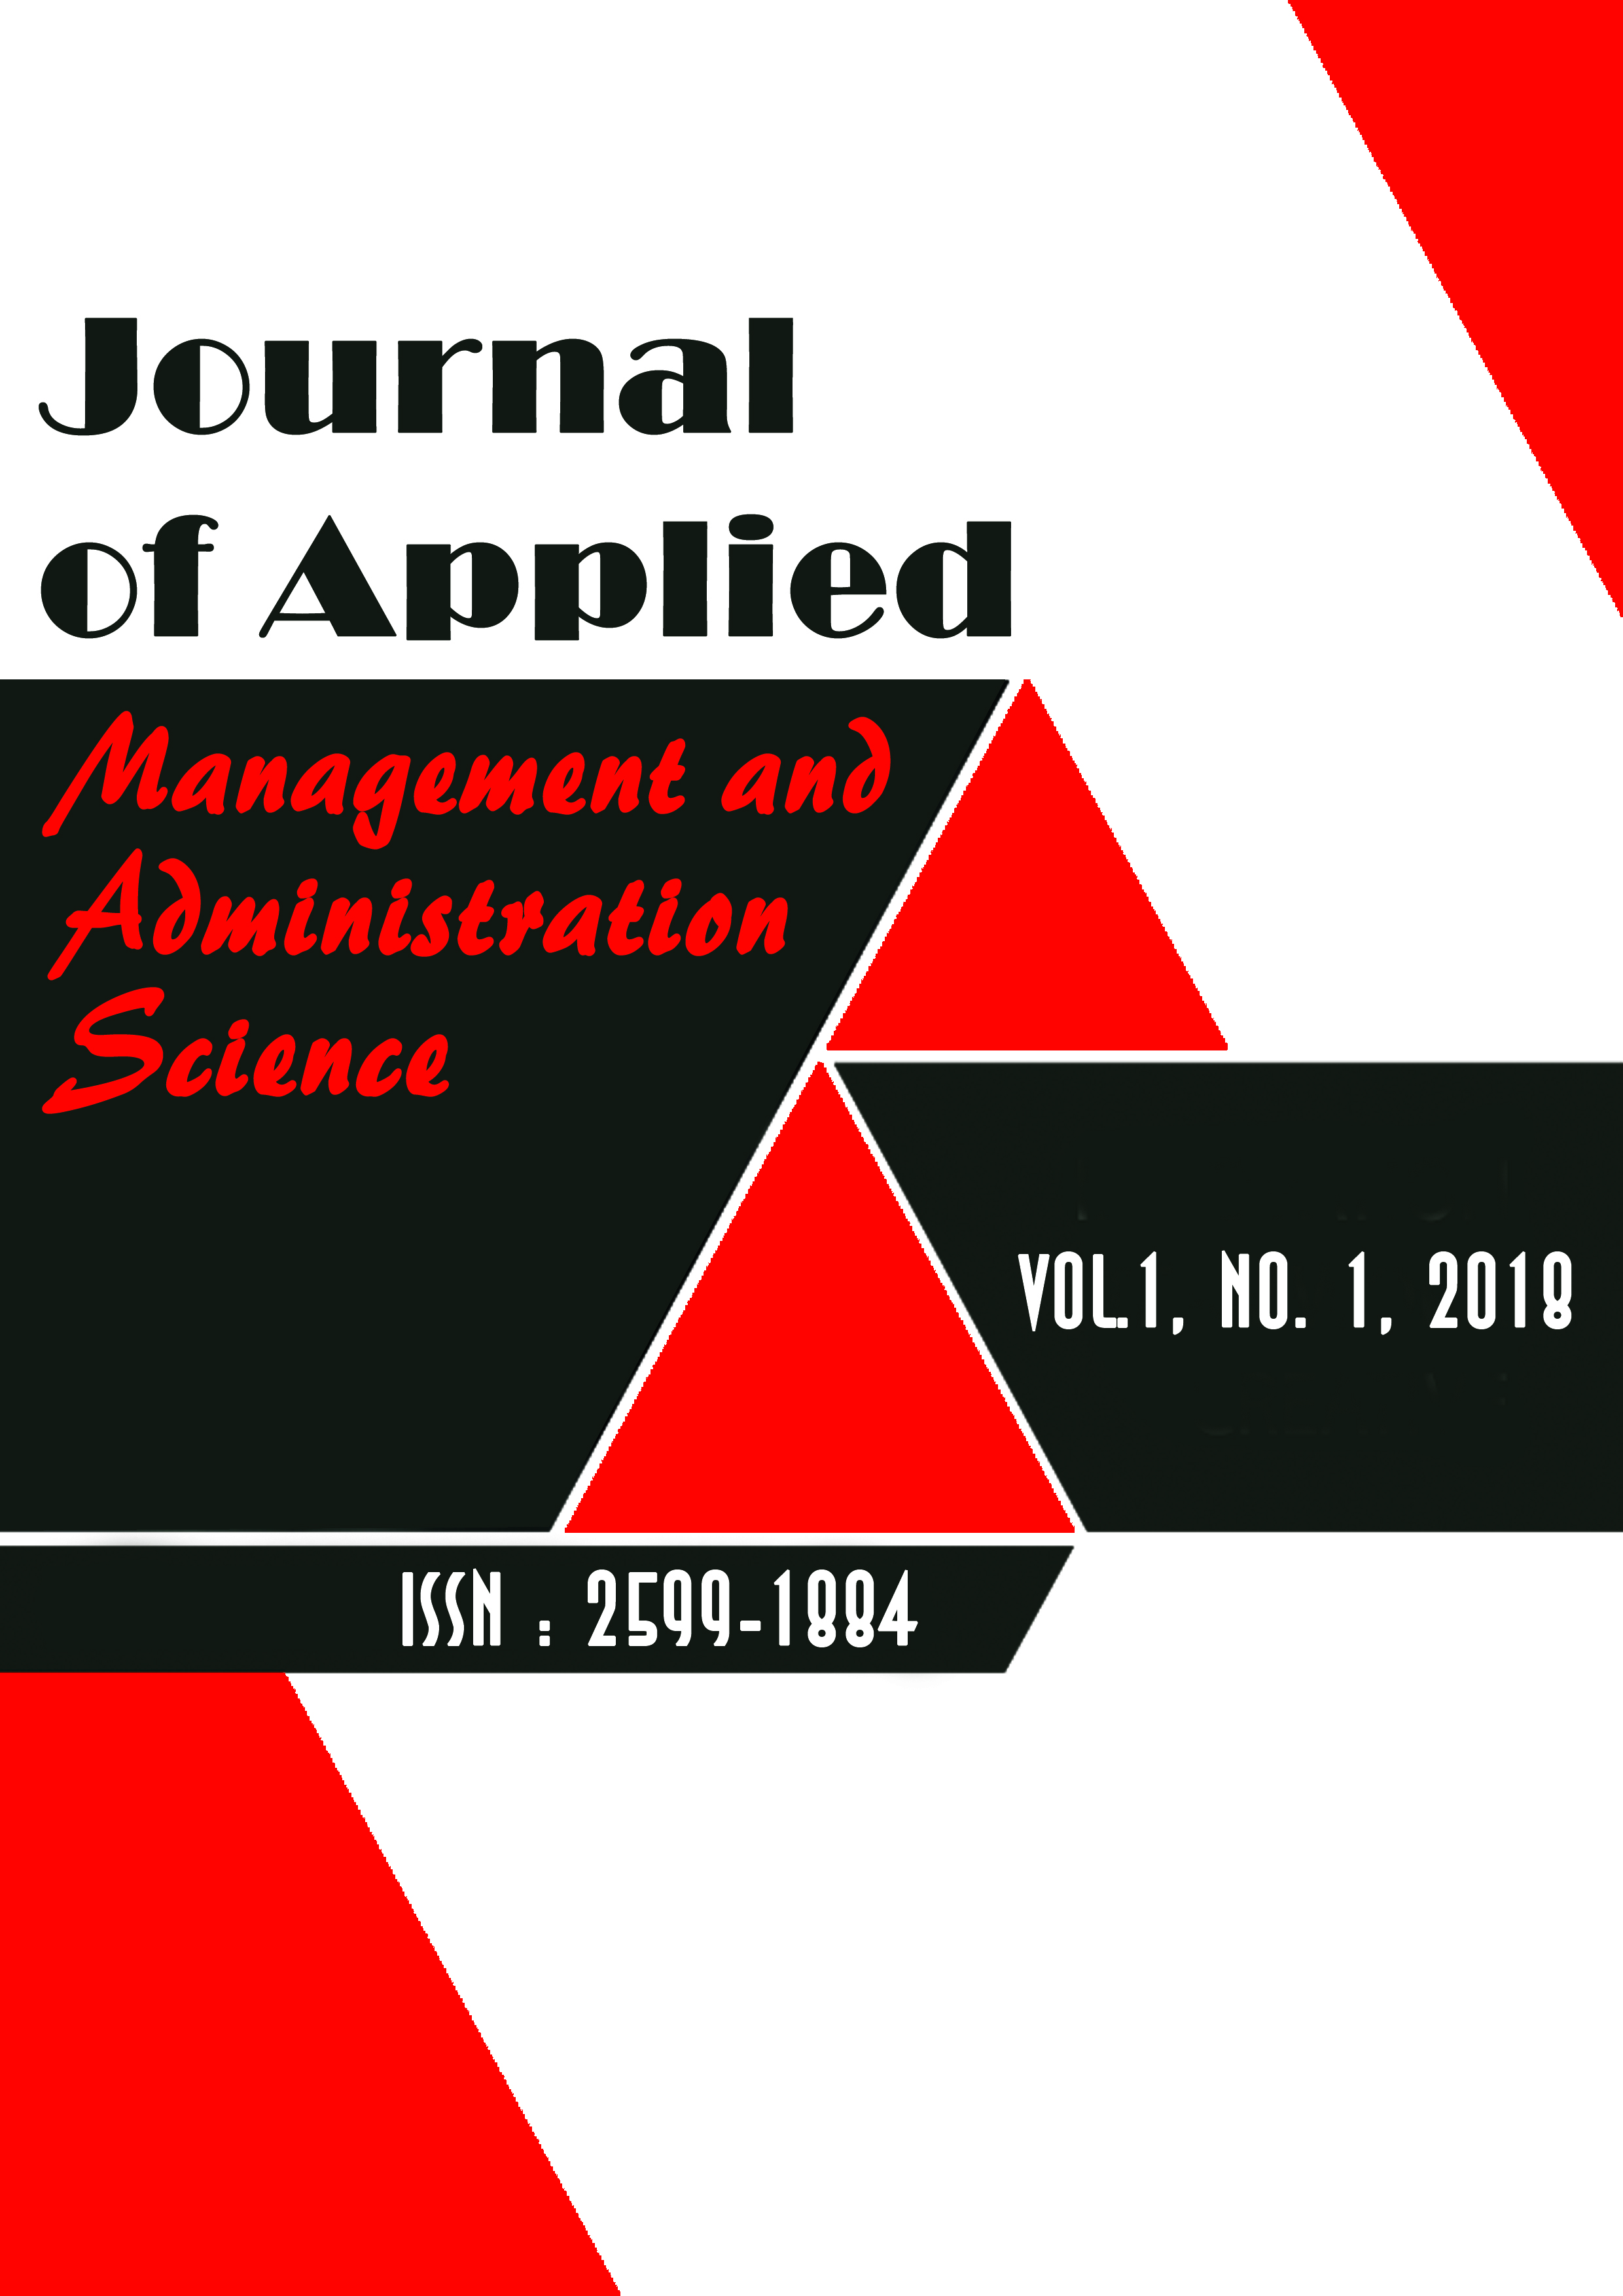 					View Vol. 1 No. 1 July (2018): Journal of Applied Management and Administration Science
				